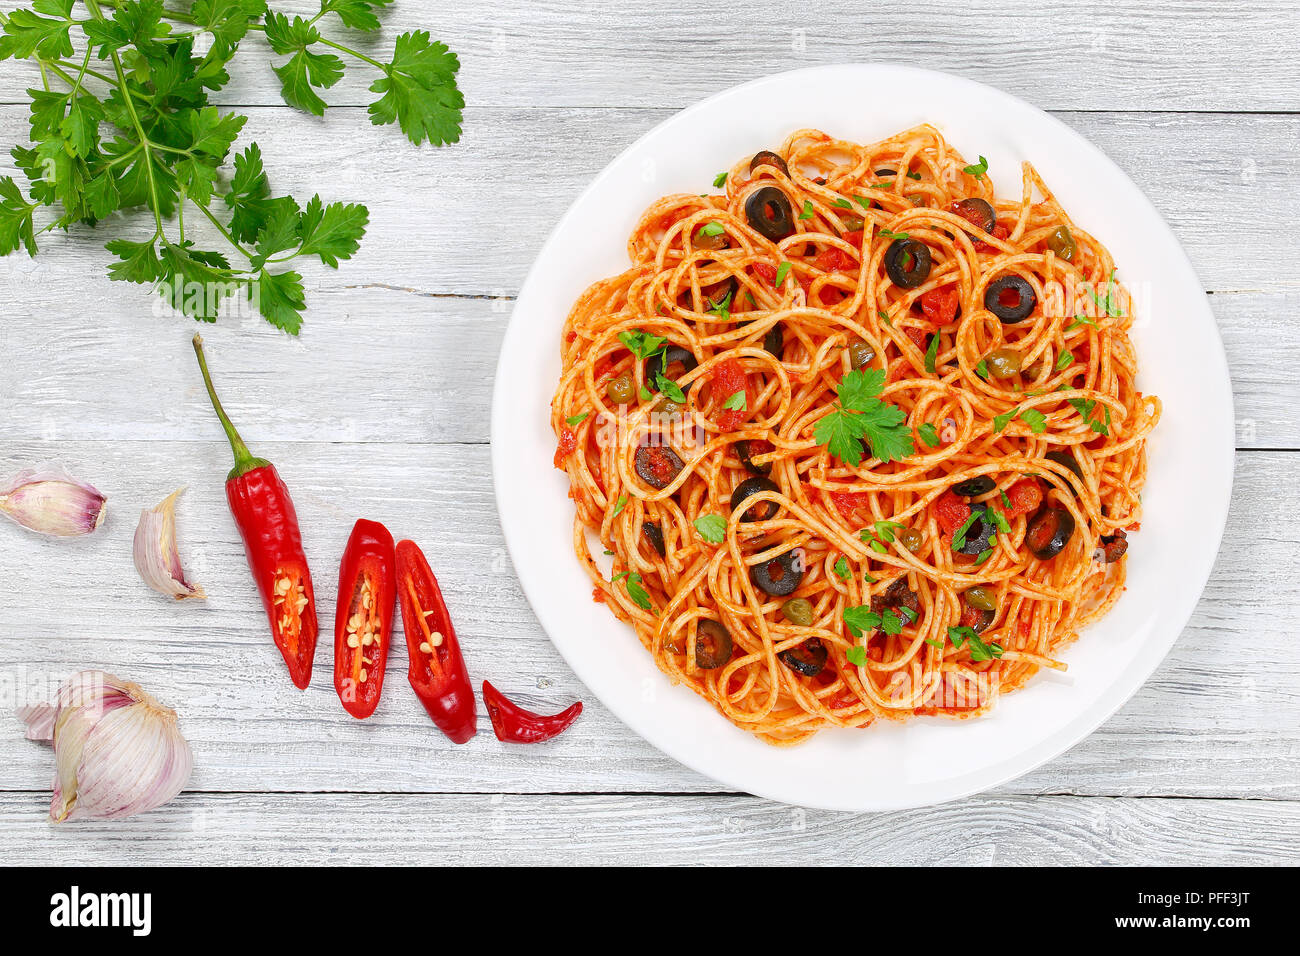 Delicious Spaghetti alla puttanesca with capers, olives, anchovies, tomato sauce sprinkled with parsley on white plate on wooden table with ingredient Stock Photo